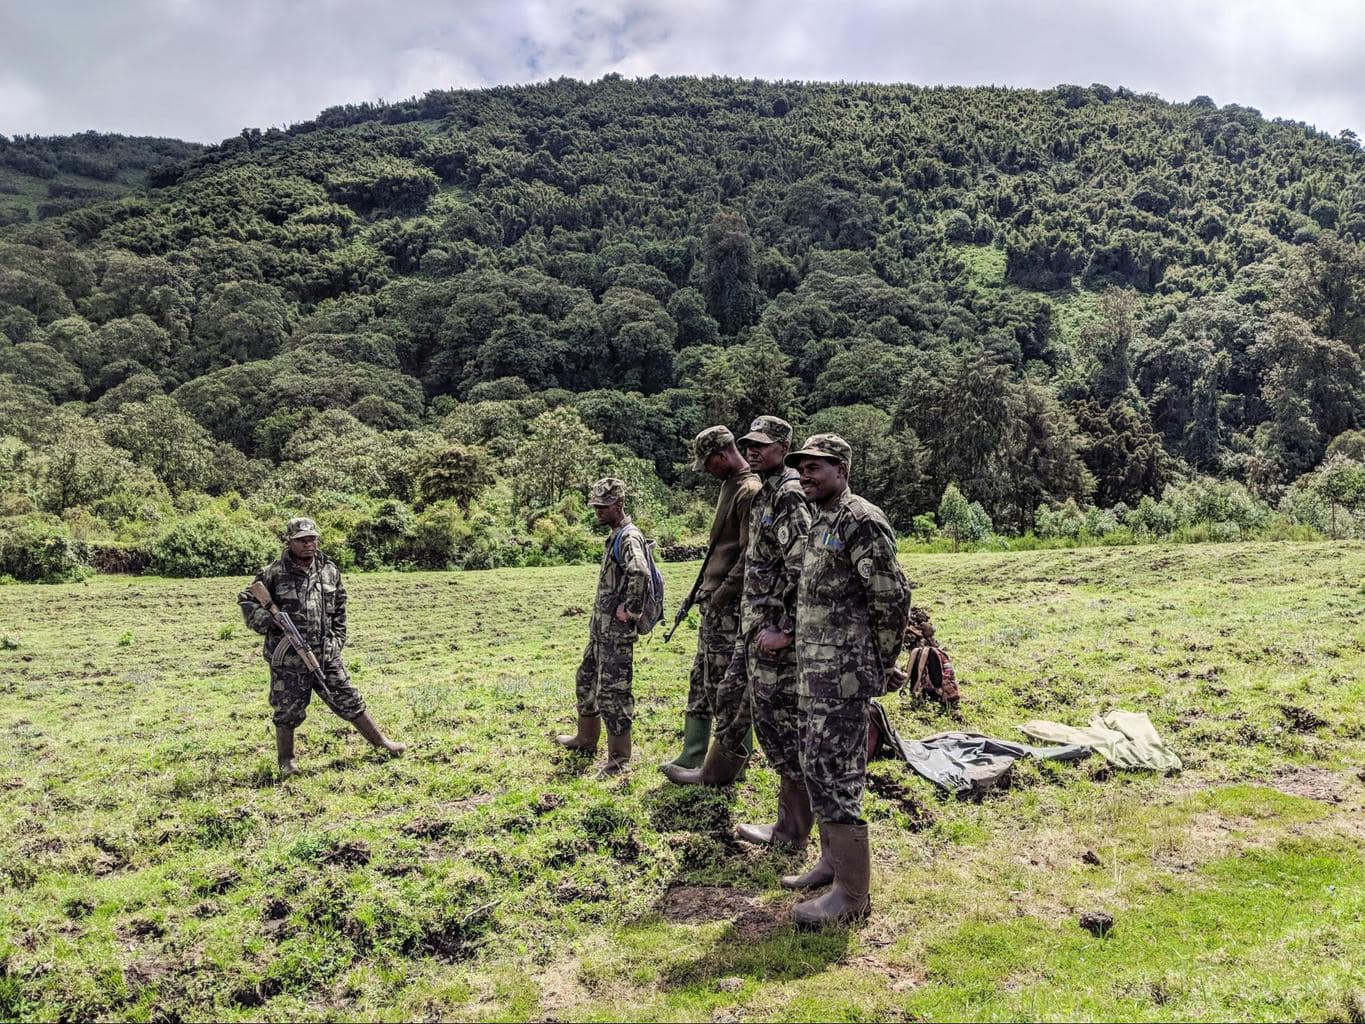 Park rangers and trackers ready to protect mountain gorillas